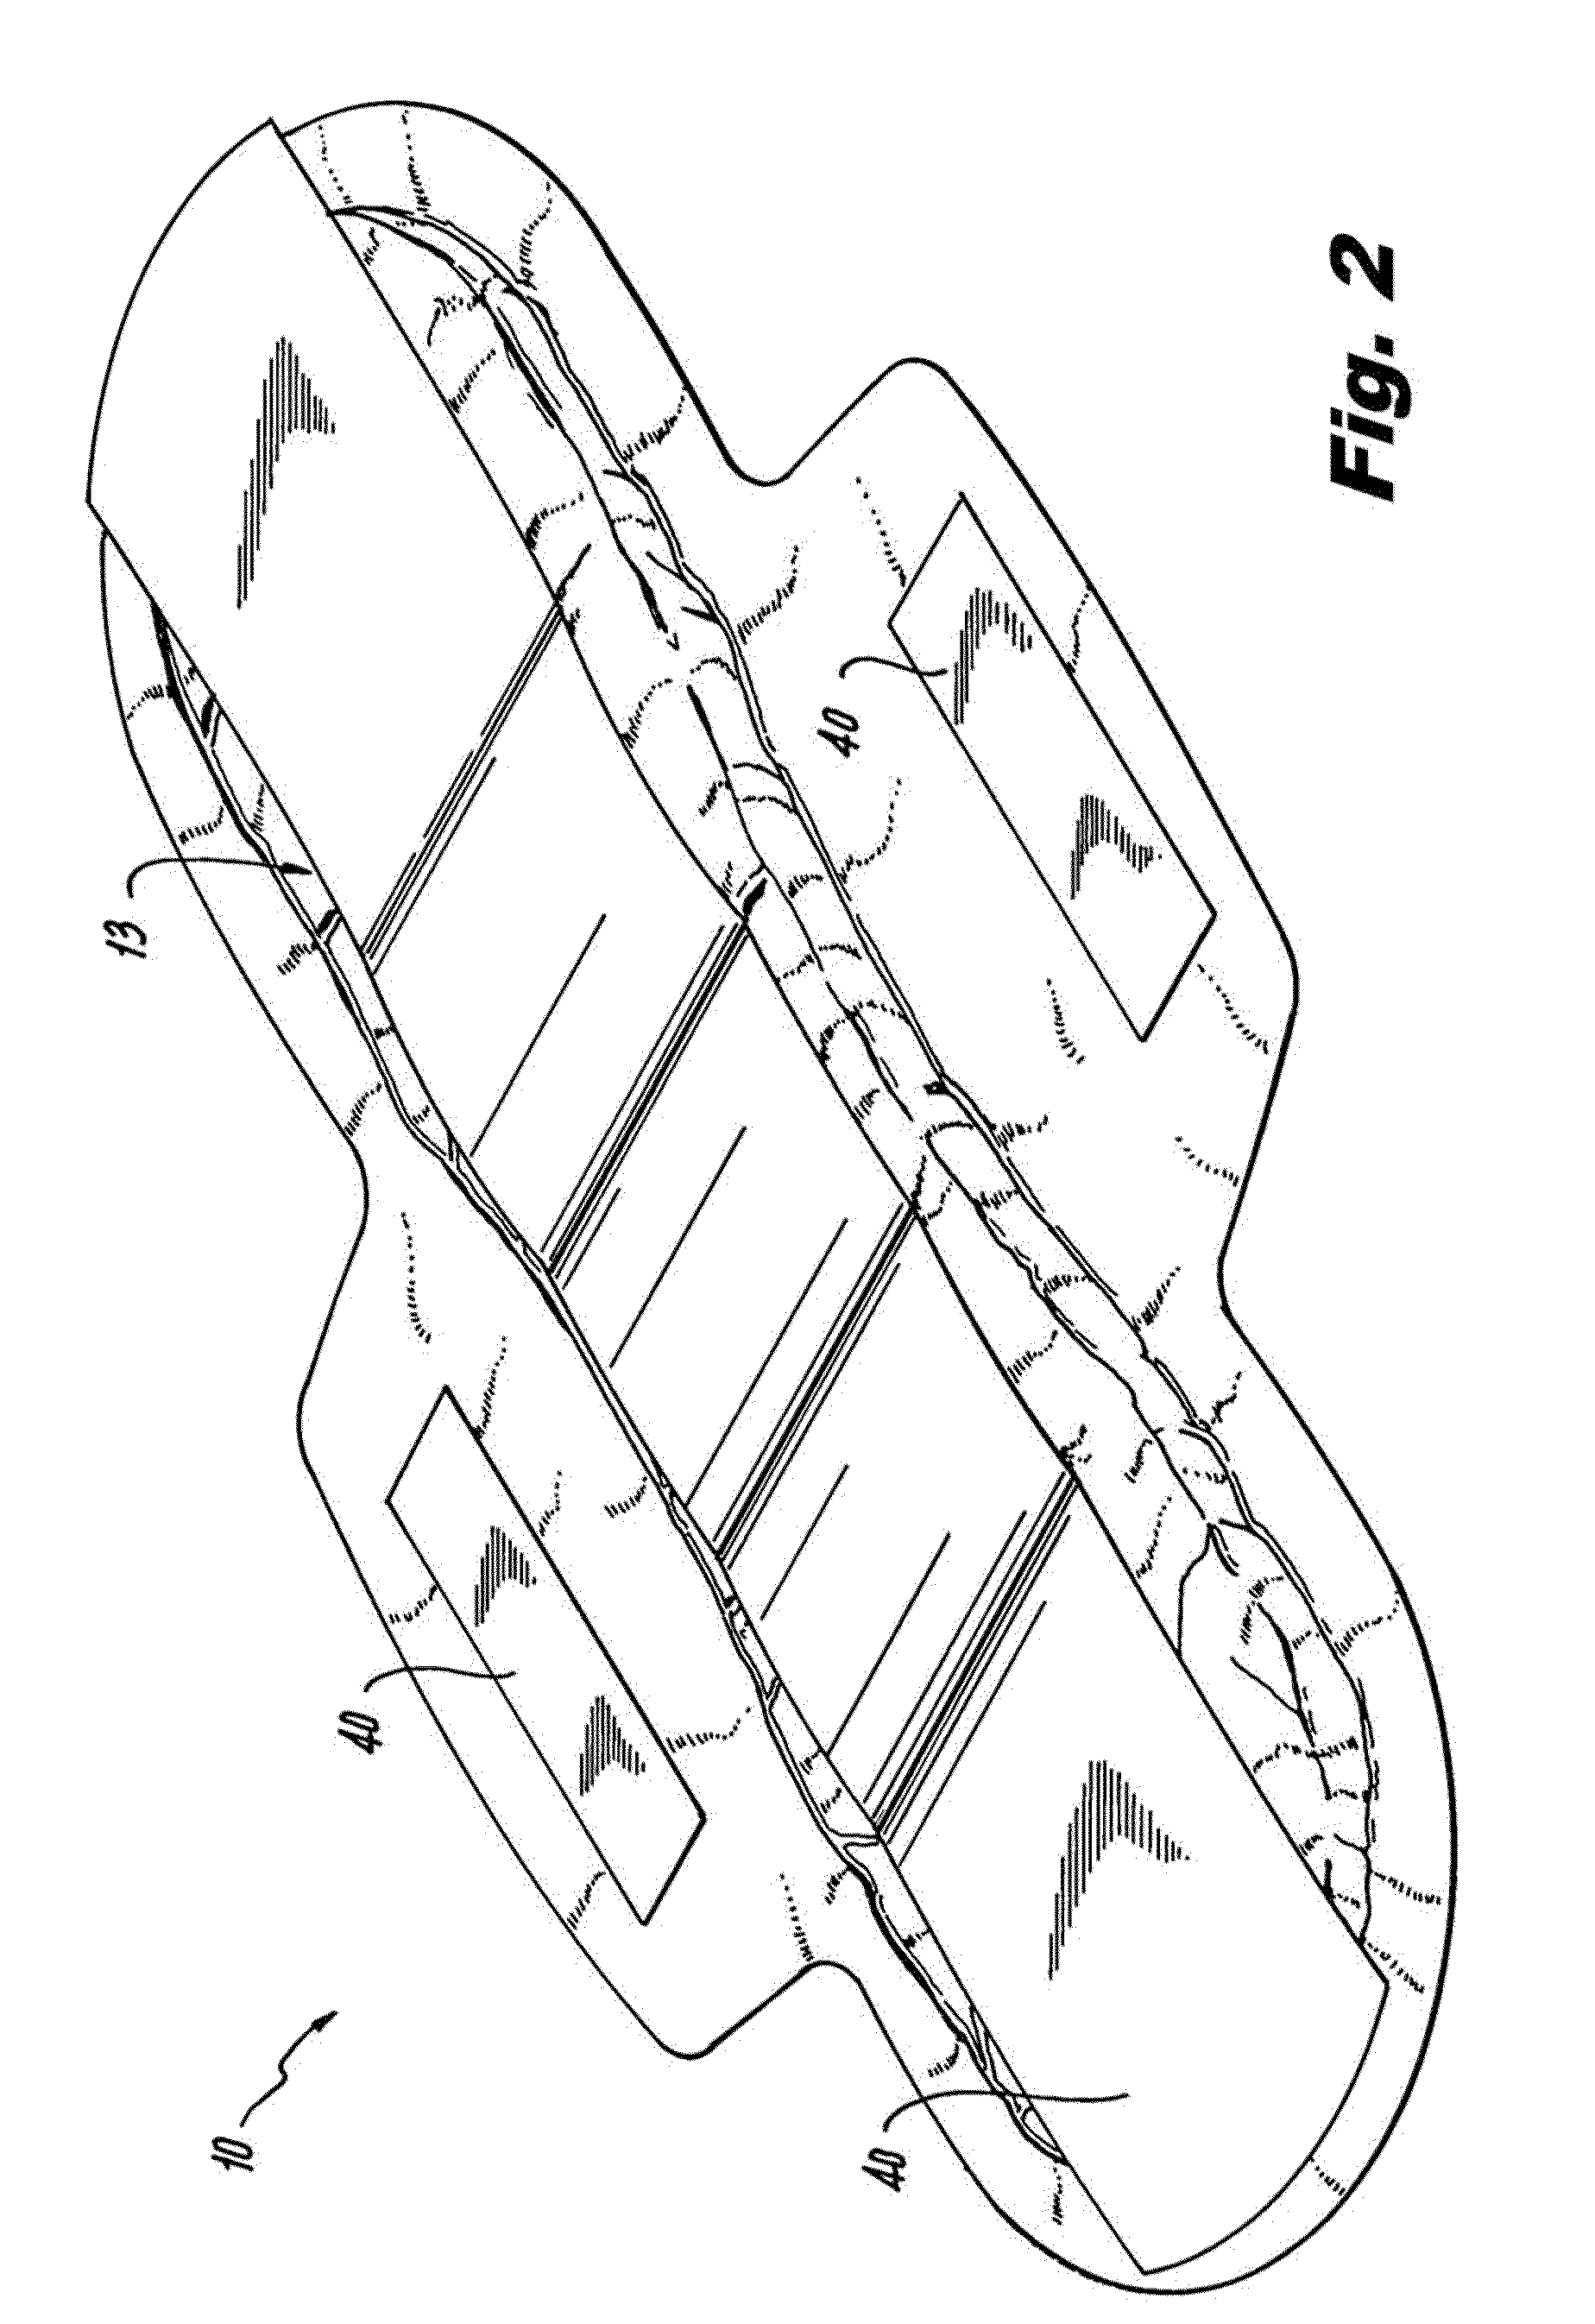 Absorbent article including an absorbent core layer having a material free zone and a transfer layer arranged below the absorbent core layer